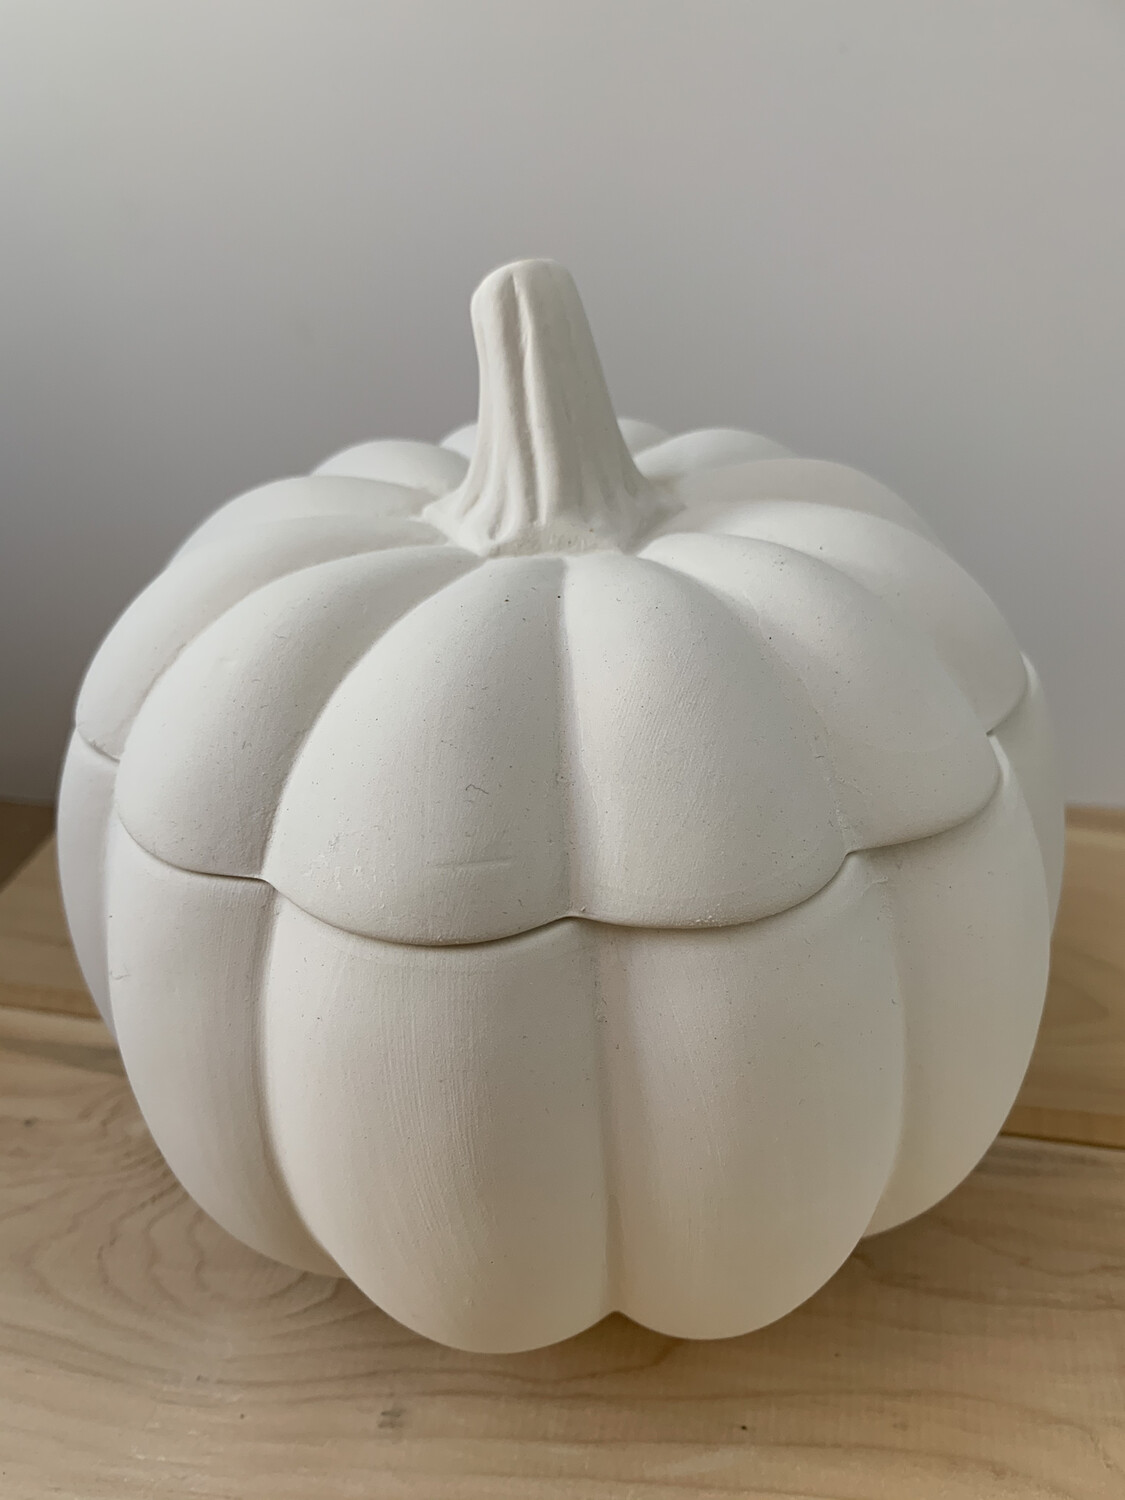 Paint Your Own Pottery - Ceramic
Pumpkin Box Painting Kit